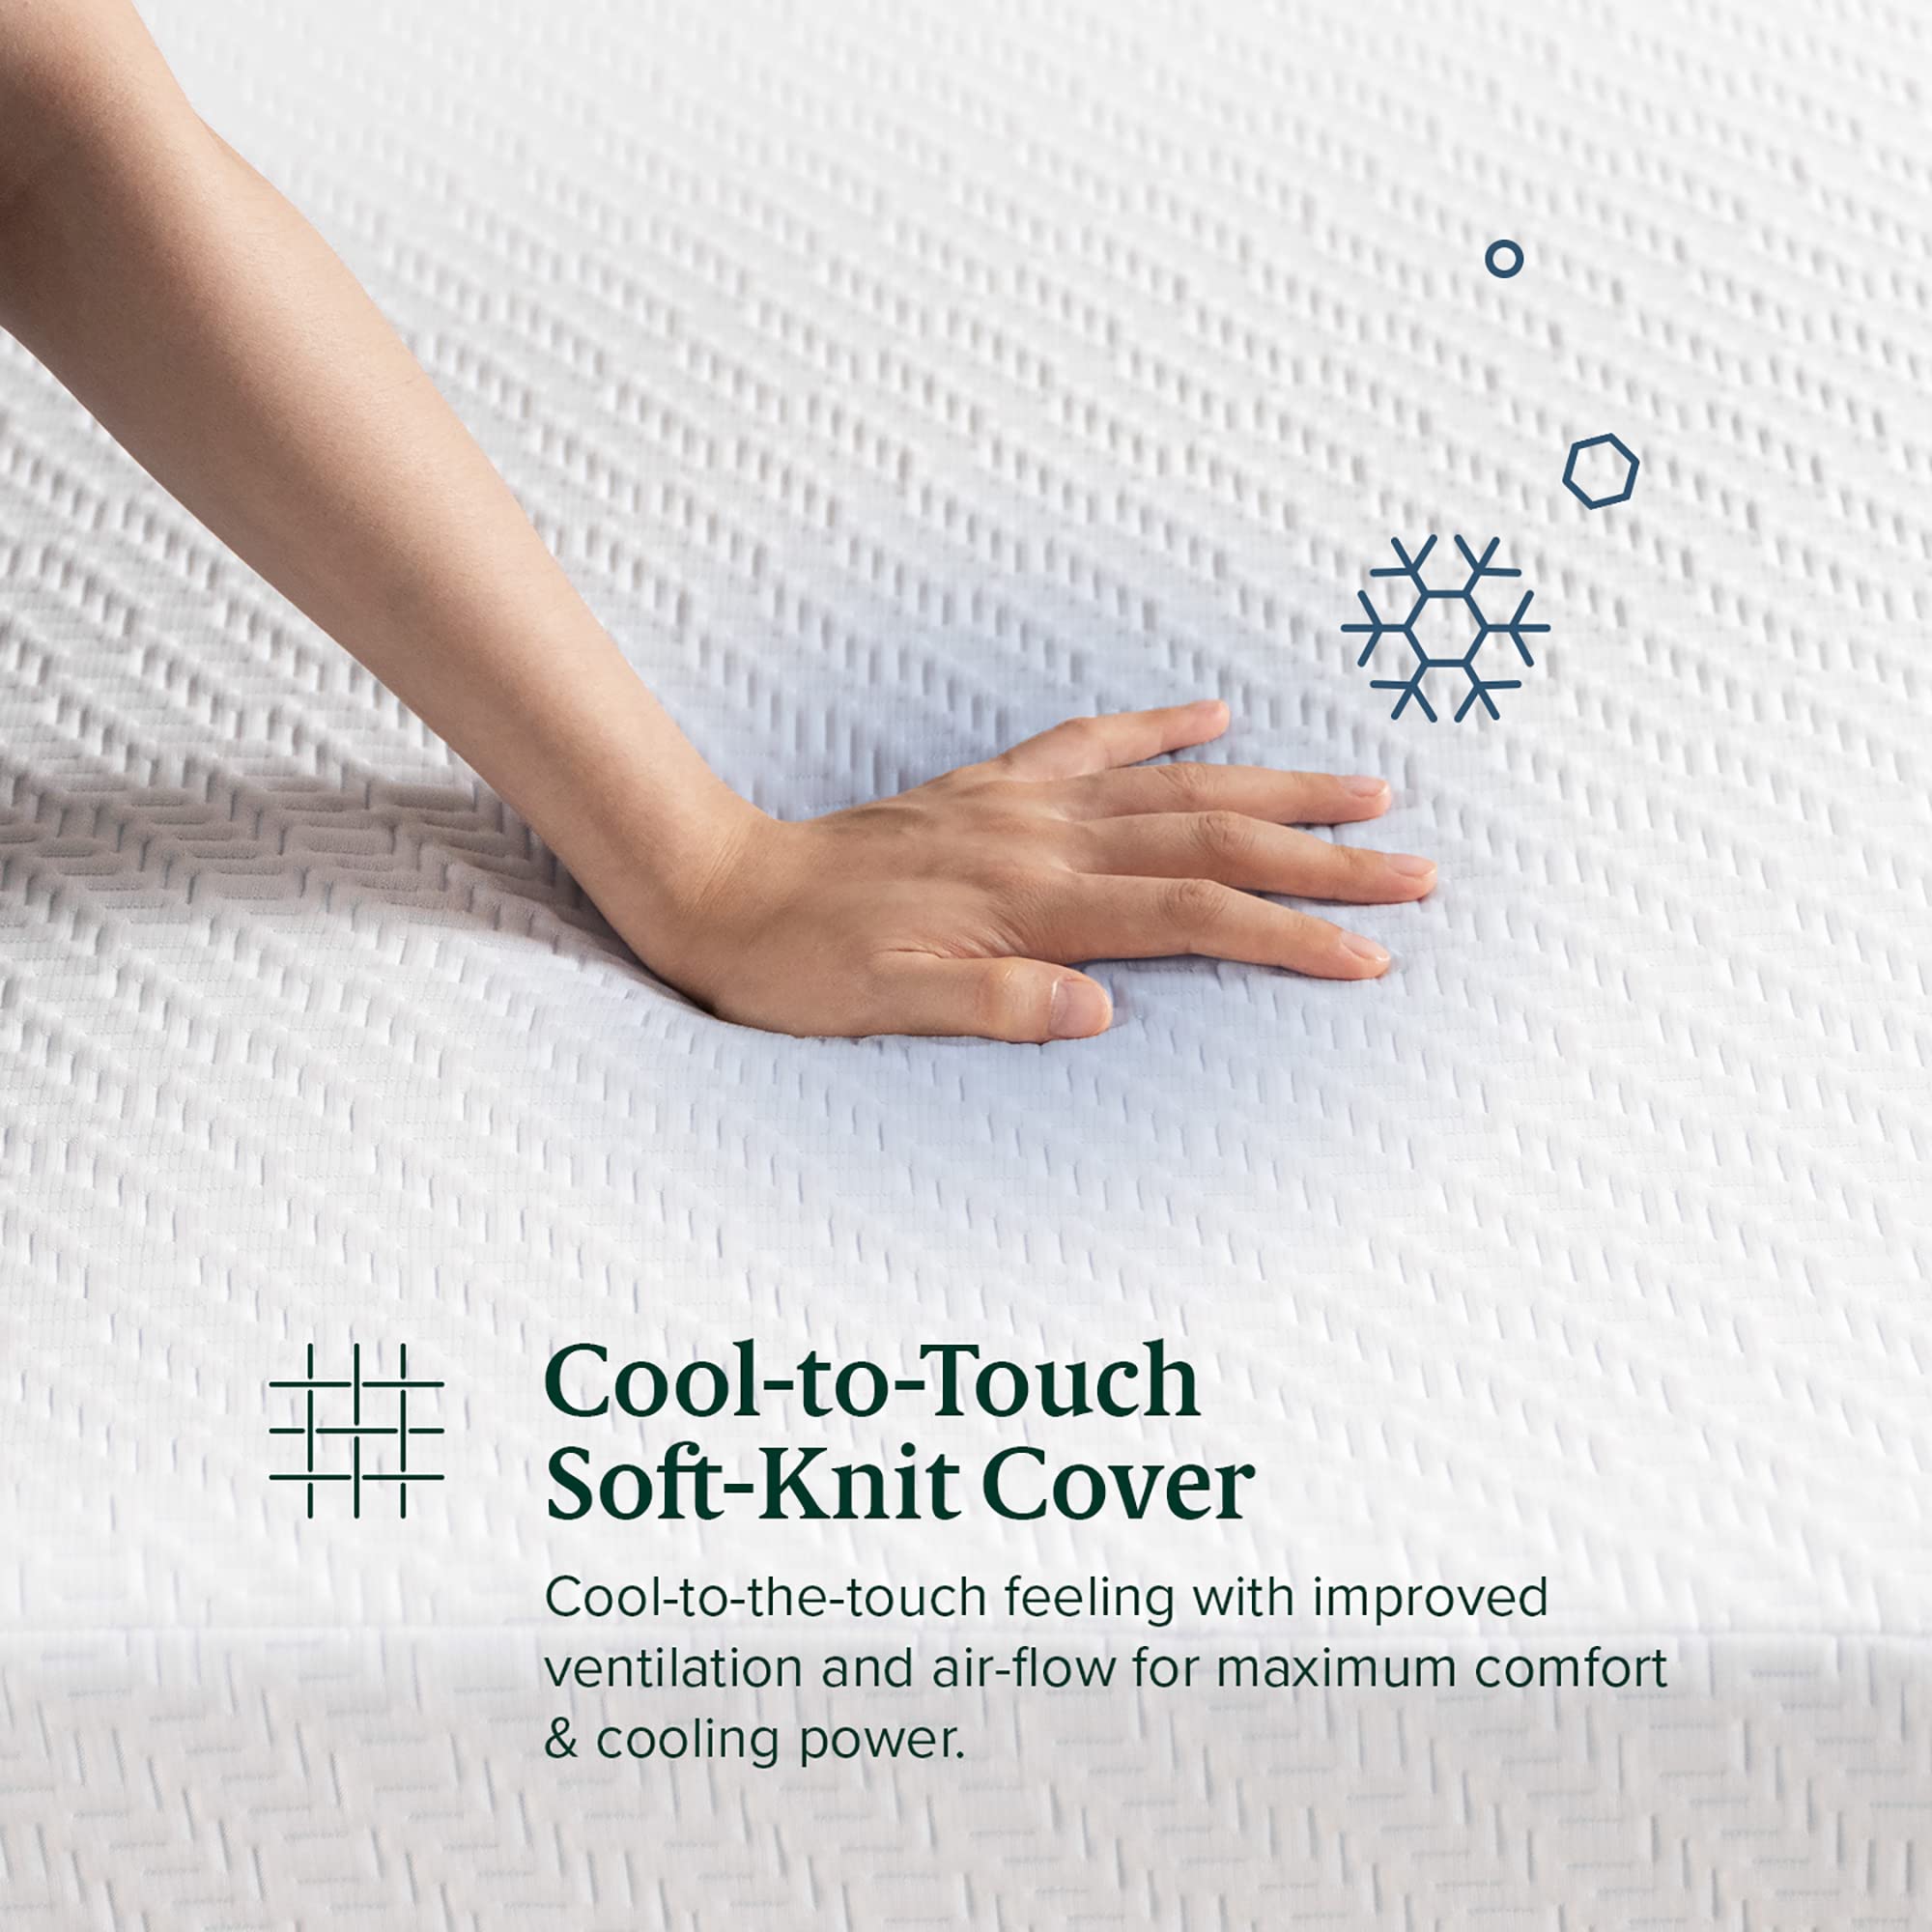 ZINUS 12 Inch Ultra Cooling Gel Memory Foam Mattress / Cool-to-Touch Soft Knit Cover / Pressure Relieving / CertiPUR-US Certified / Bed-in-a-Box / All-New / Made in USA, Twin White